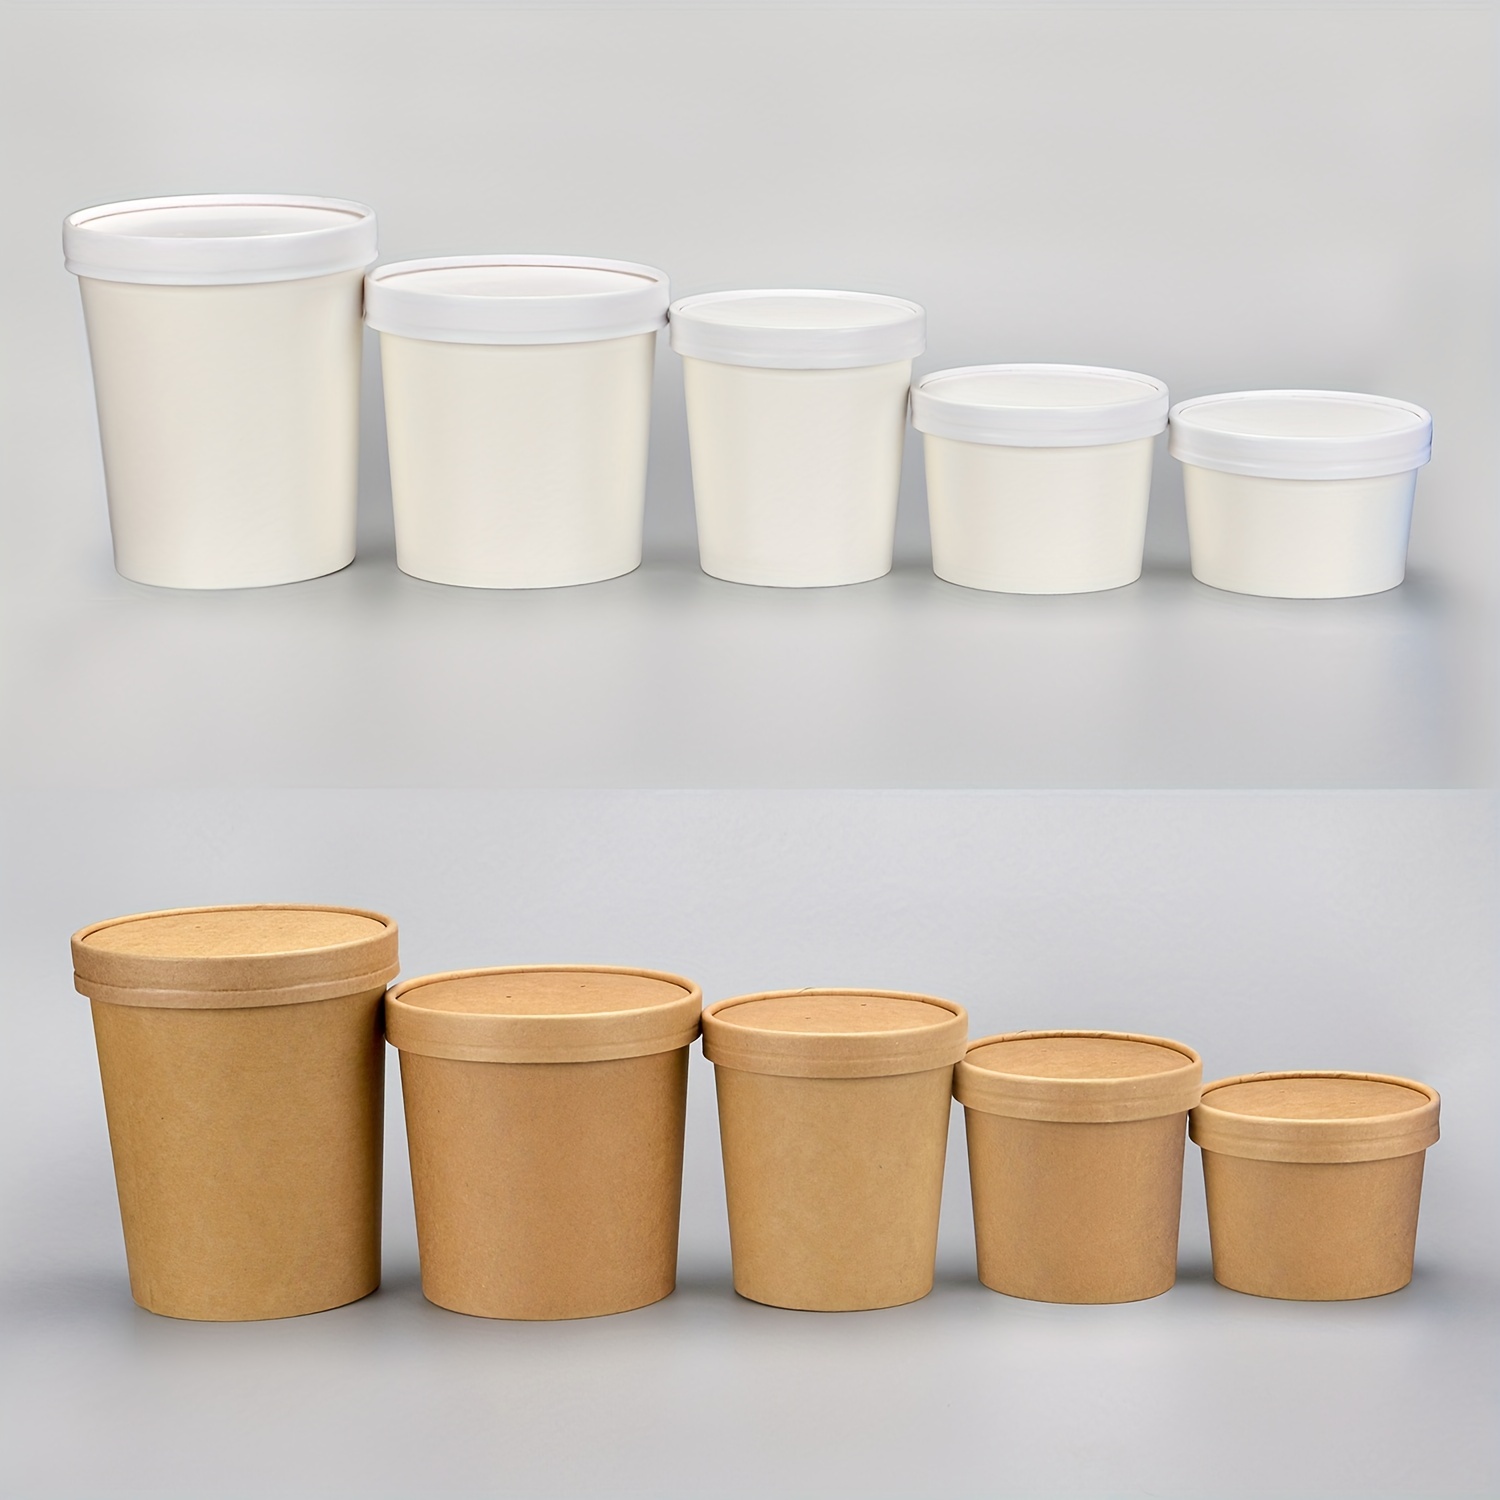 12 oz Soup Containers with Lids Disposable Soup Bowls, Ice Cream